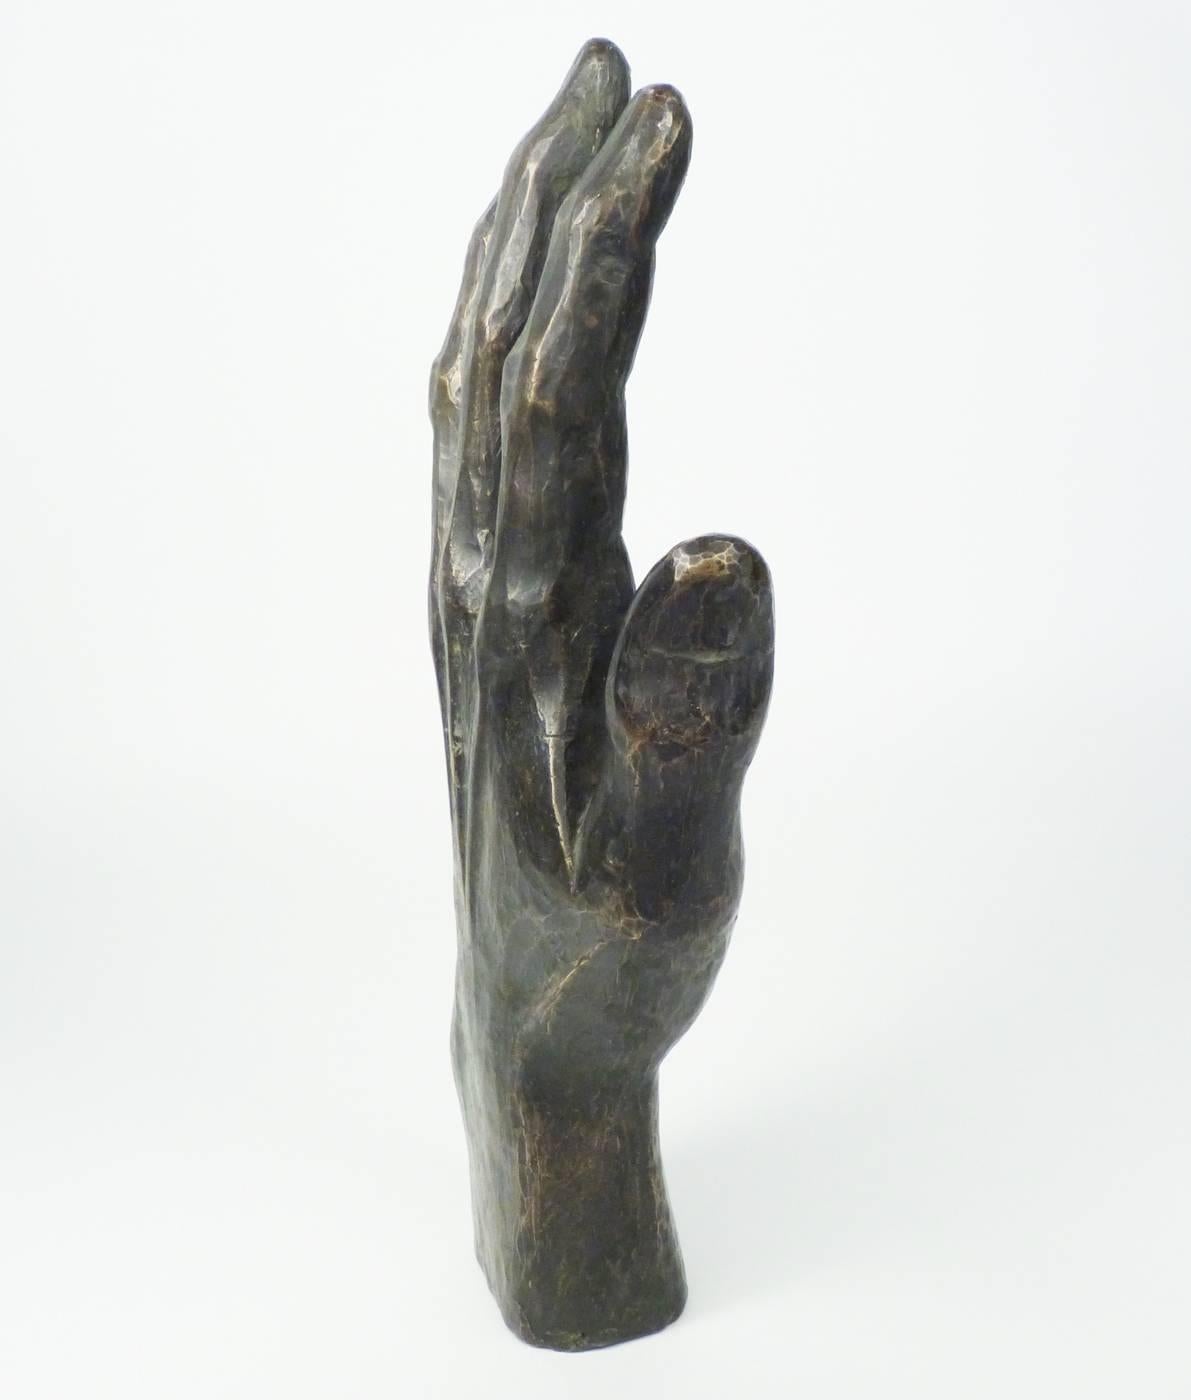 Ben Rouzie (1922-2016), a city planner in Winston-Salem, dedicated his free time to creating free-form wood vessels and cast bronze pieces. This slightly larger than life hand stands or can be mounted on the wall.
Measures: 10 3/4